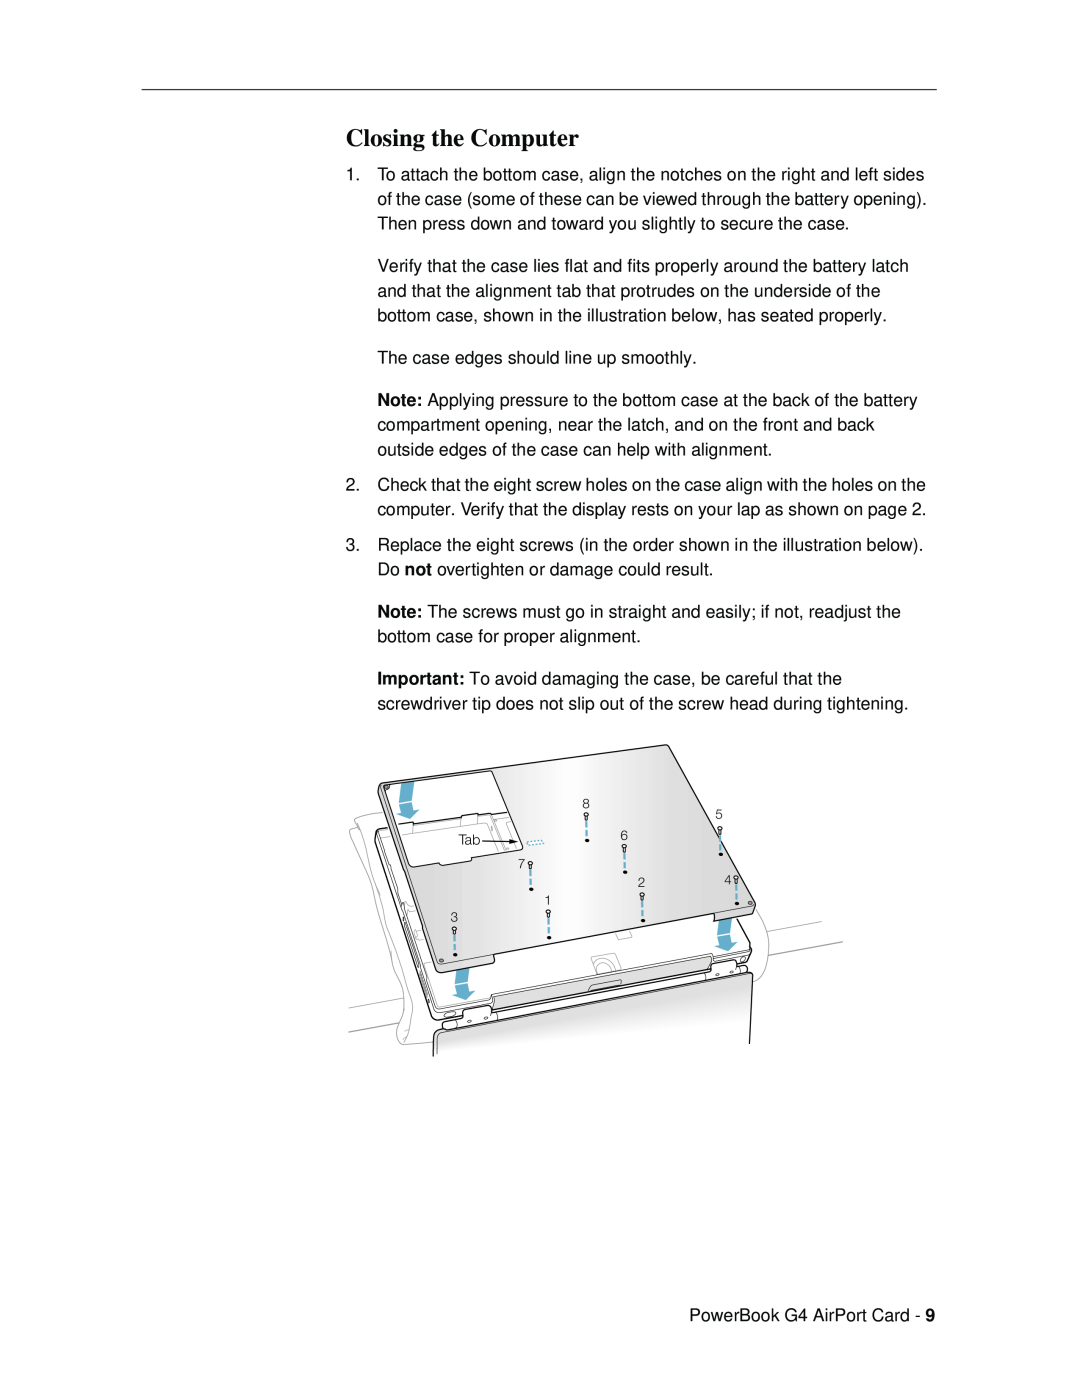 Apple G4 installation instructions Closing the Computer 